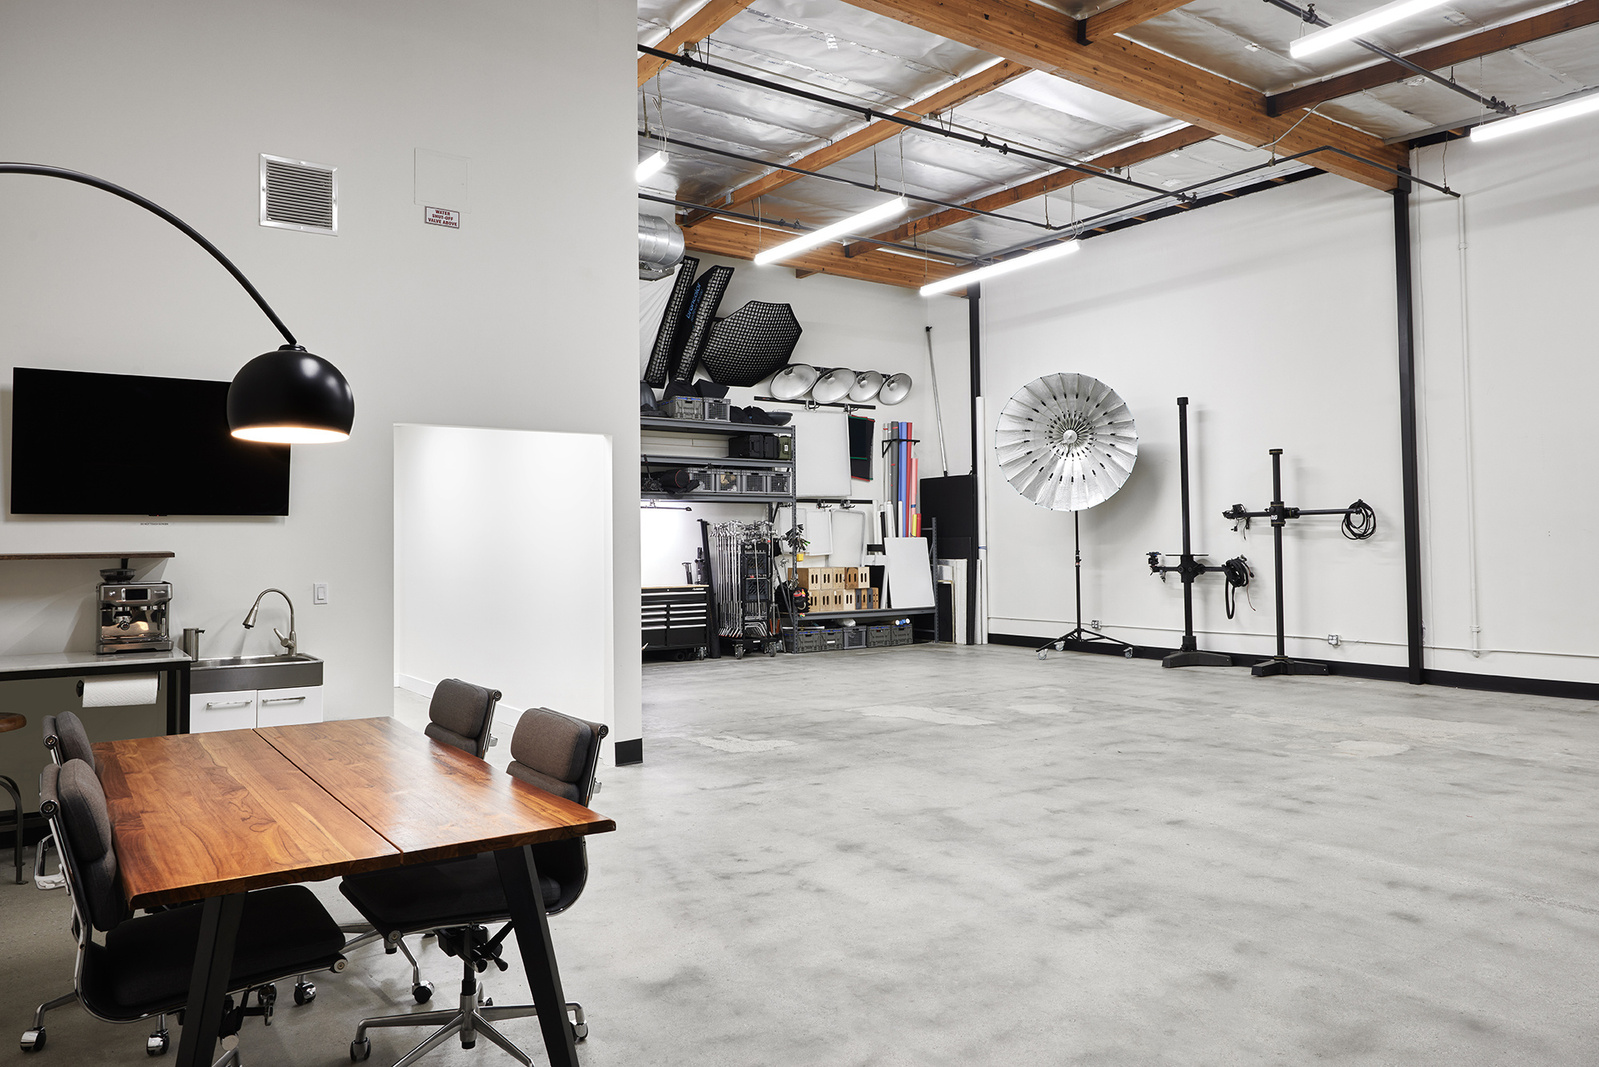 Los Angeles professional and affordable photo studio for photography and video production. Fully loaded with high-quality equipment: Broncolor, Aputure, Grip, and Digital equipment. Main Studio.
